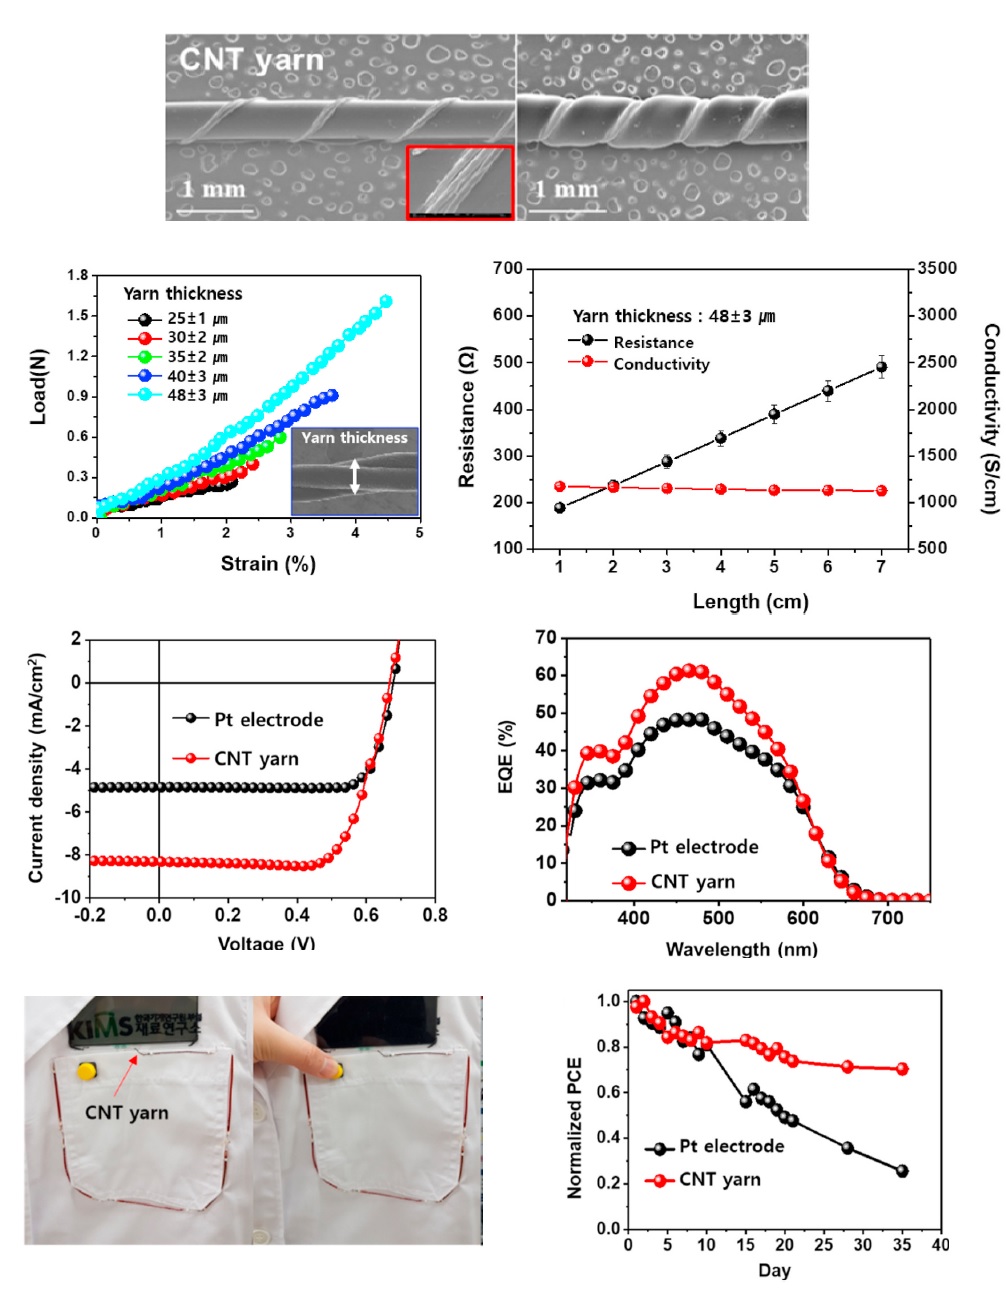 (158) J.-H. Kim, S.K. Hong, S.-J. Yoo, C.Y. Woo, J.W. Choi, D. Lee, J.-W. Kang, H.W. Lee,* M. Song* “Pt-free, cost-effective and efficient counter electrode with carbon nanotube yarn for solid-state fiber dye-sensitized solar cells” Dyes and Pigments. 185, 108855 (2021). 대표이미지